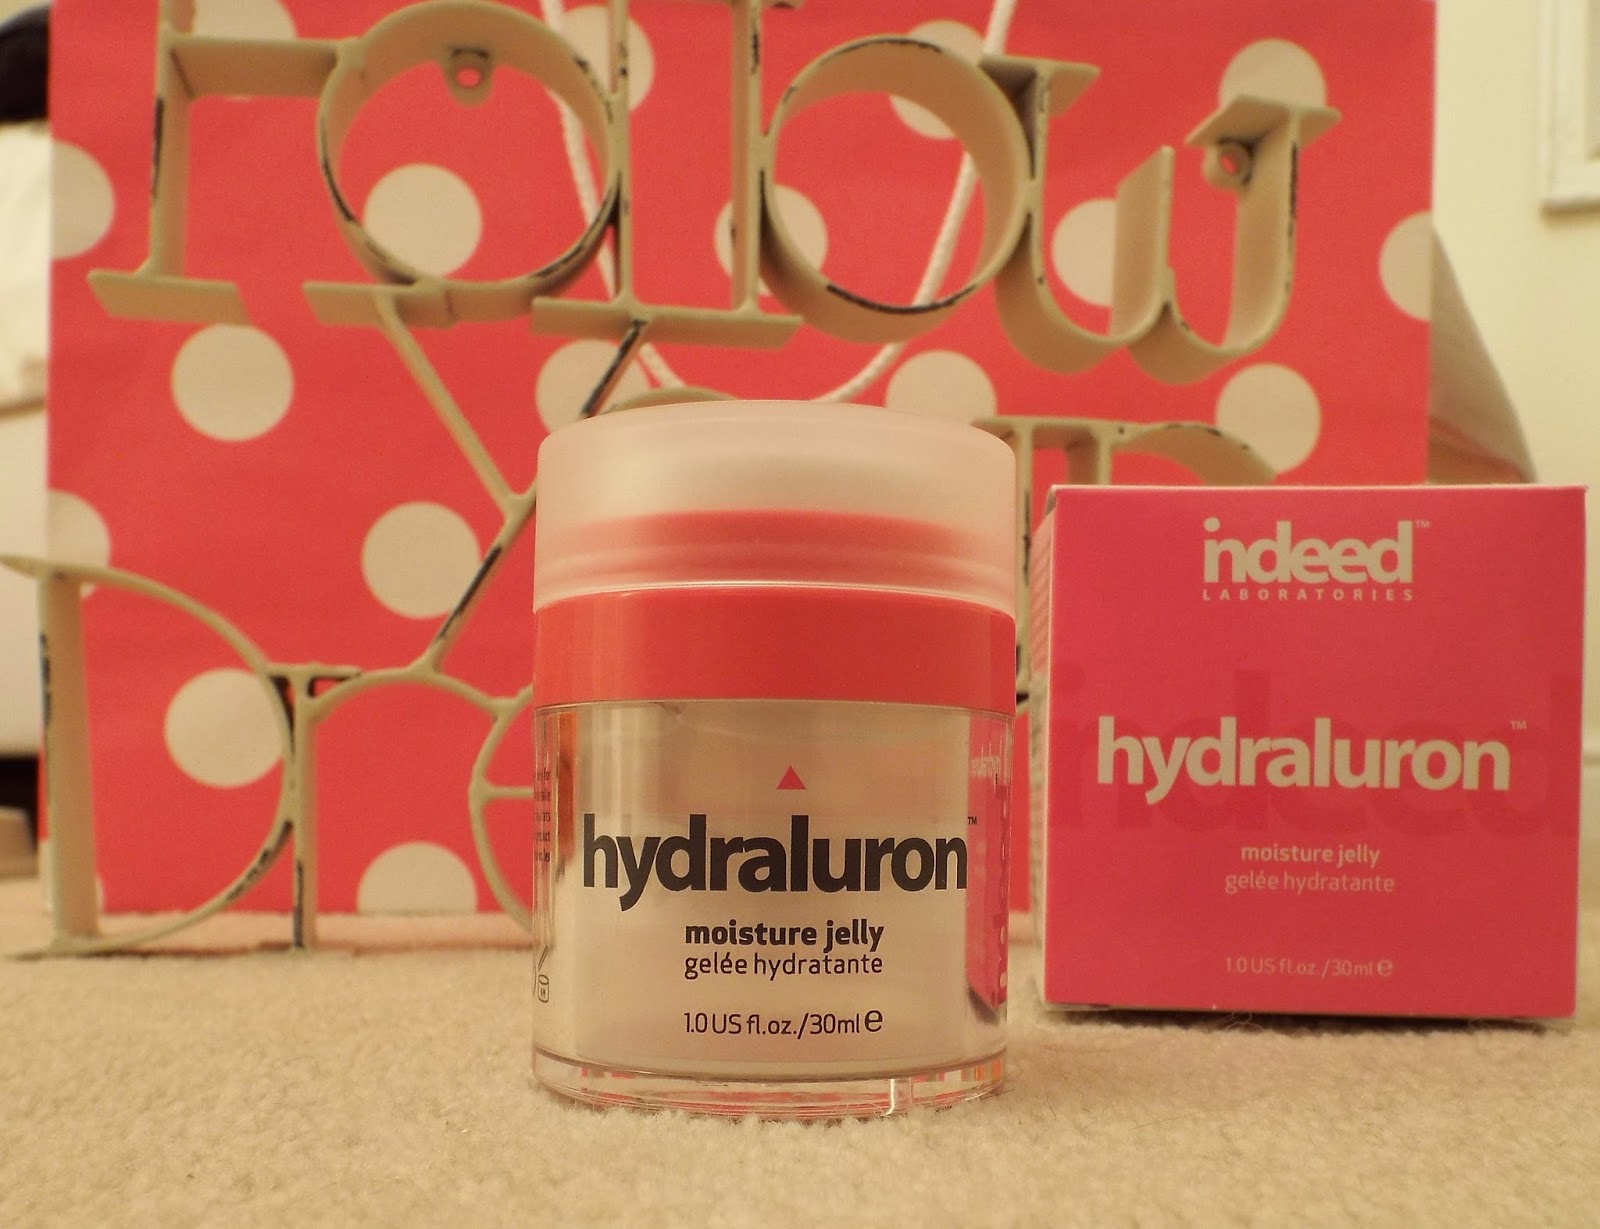 Hydraluron Moisture Jelly Review